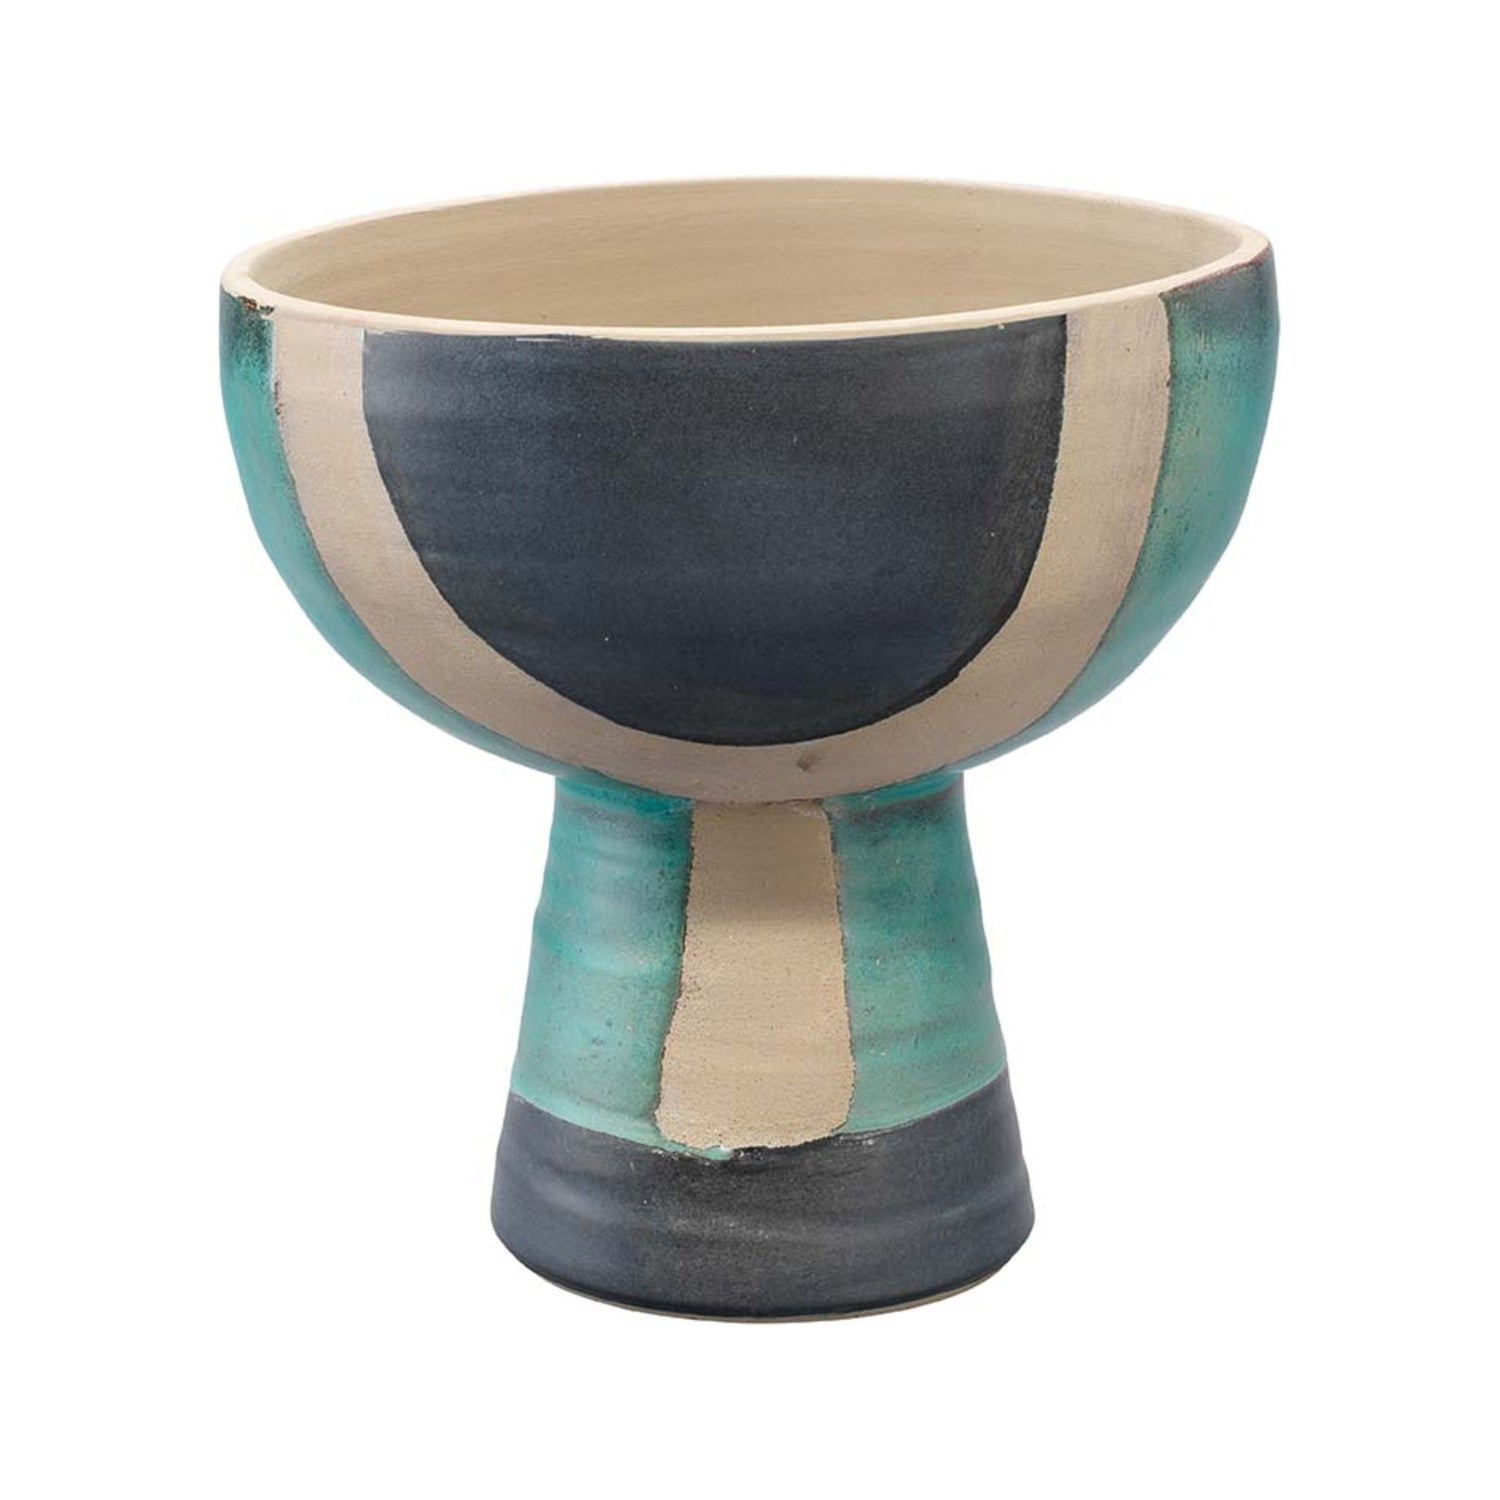 Jamie Young Company - 7BLAN-VEAQ - Blanche Wide Vessel - Blanche - Aqua